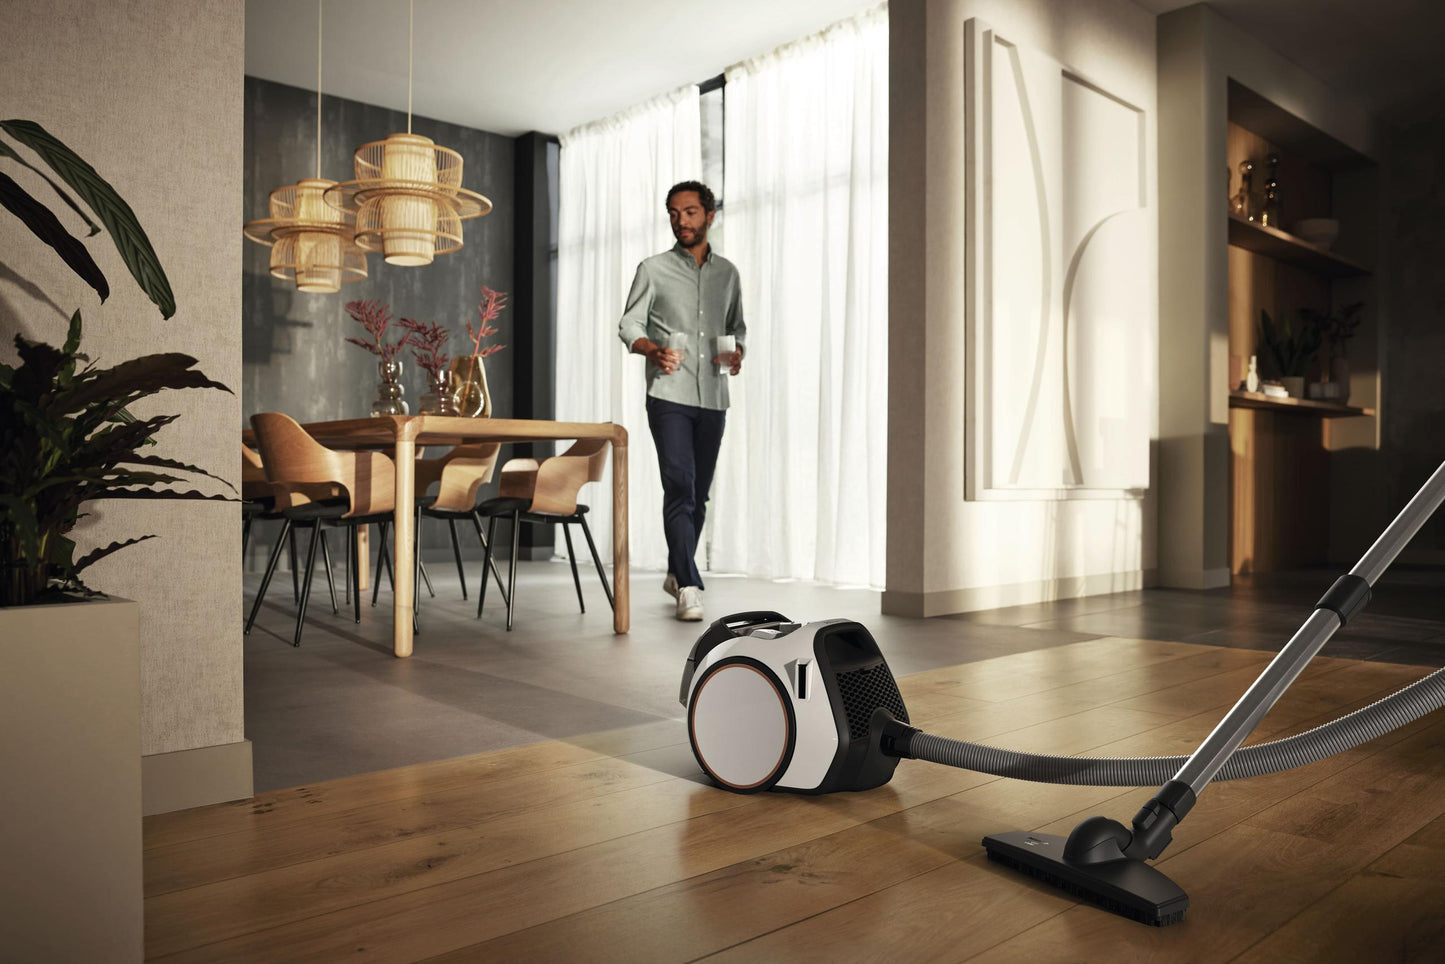 Miele BOOSTCX1PARQUETLOTUSWHITE Boost Cx1 Parquet - Bagless Canister Vacuum Cleaners For Superior Care Of Sensitive Floors, In A Compact Design.